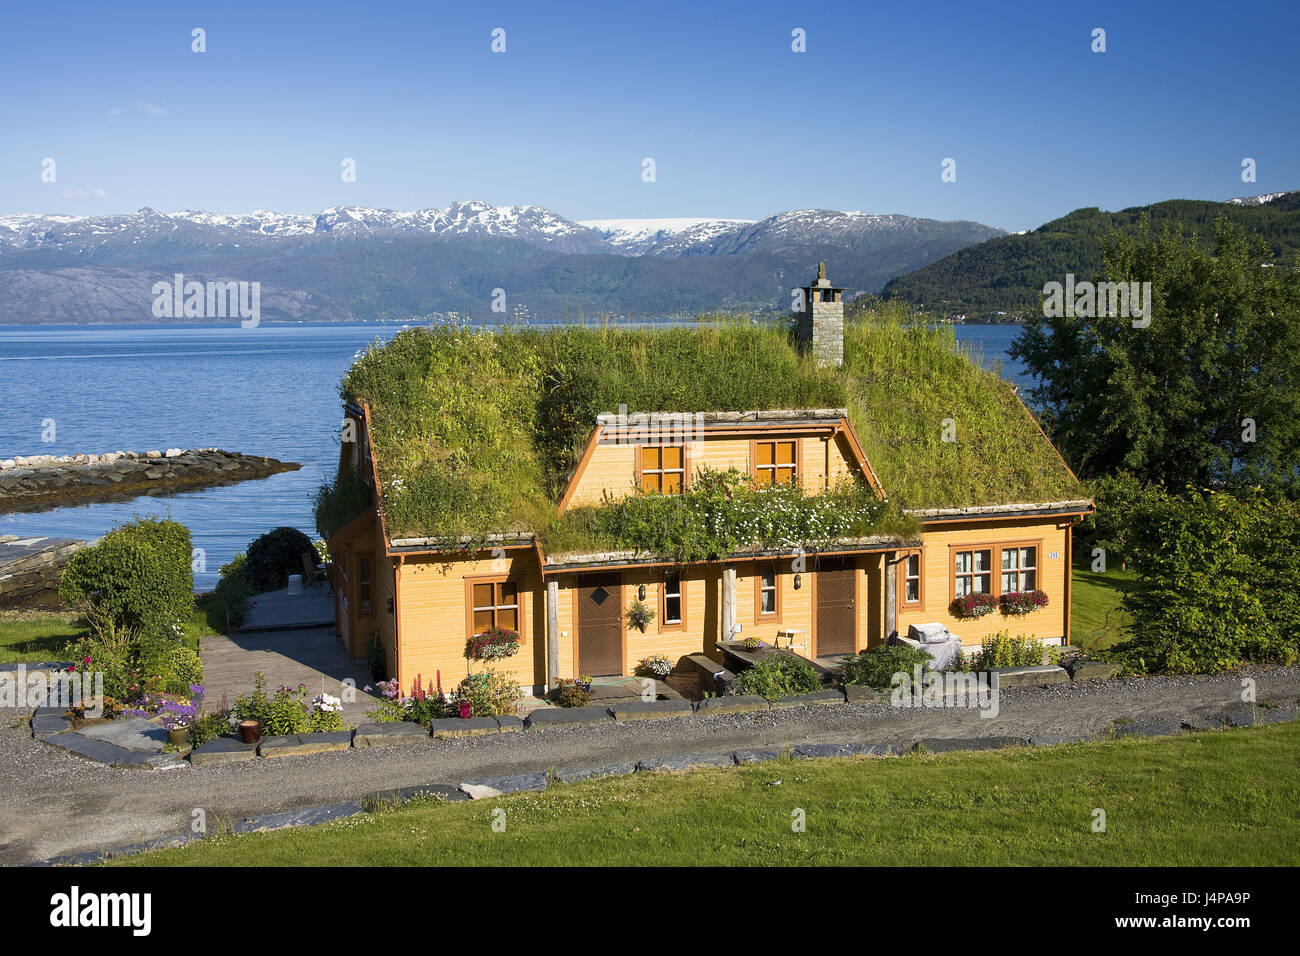 Norway, Hardarnerfjord, house, grass roof, Stock Photo